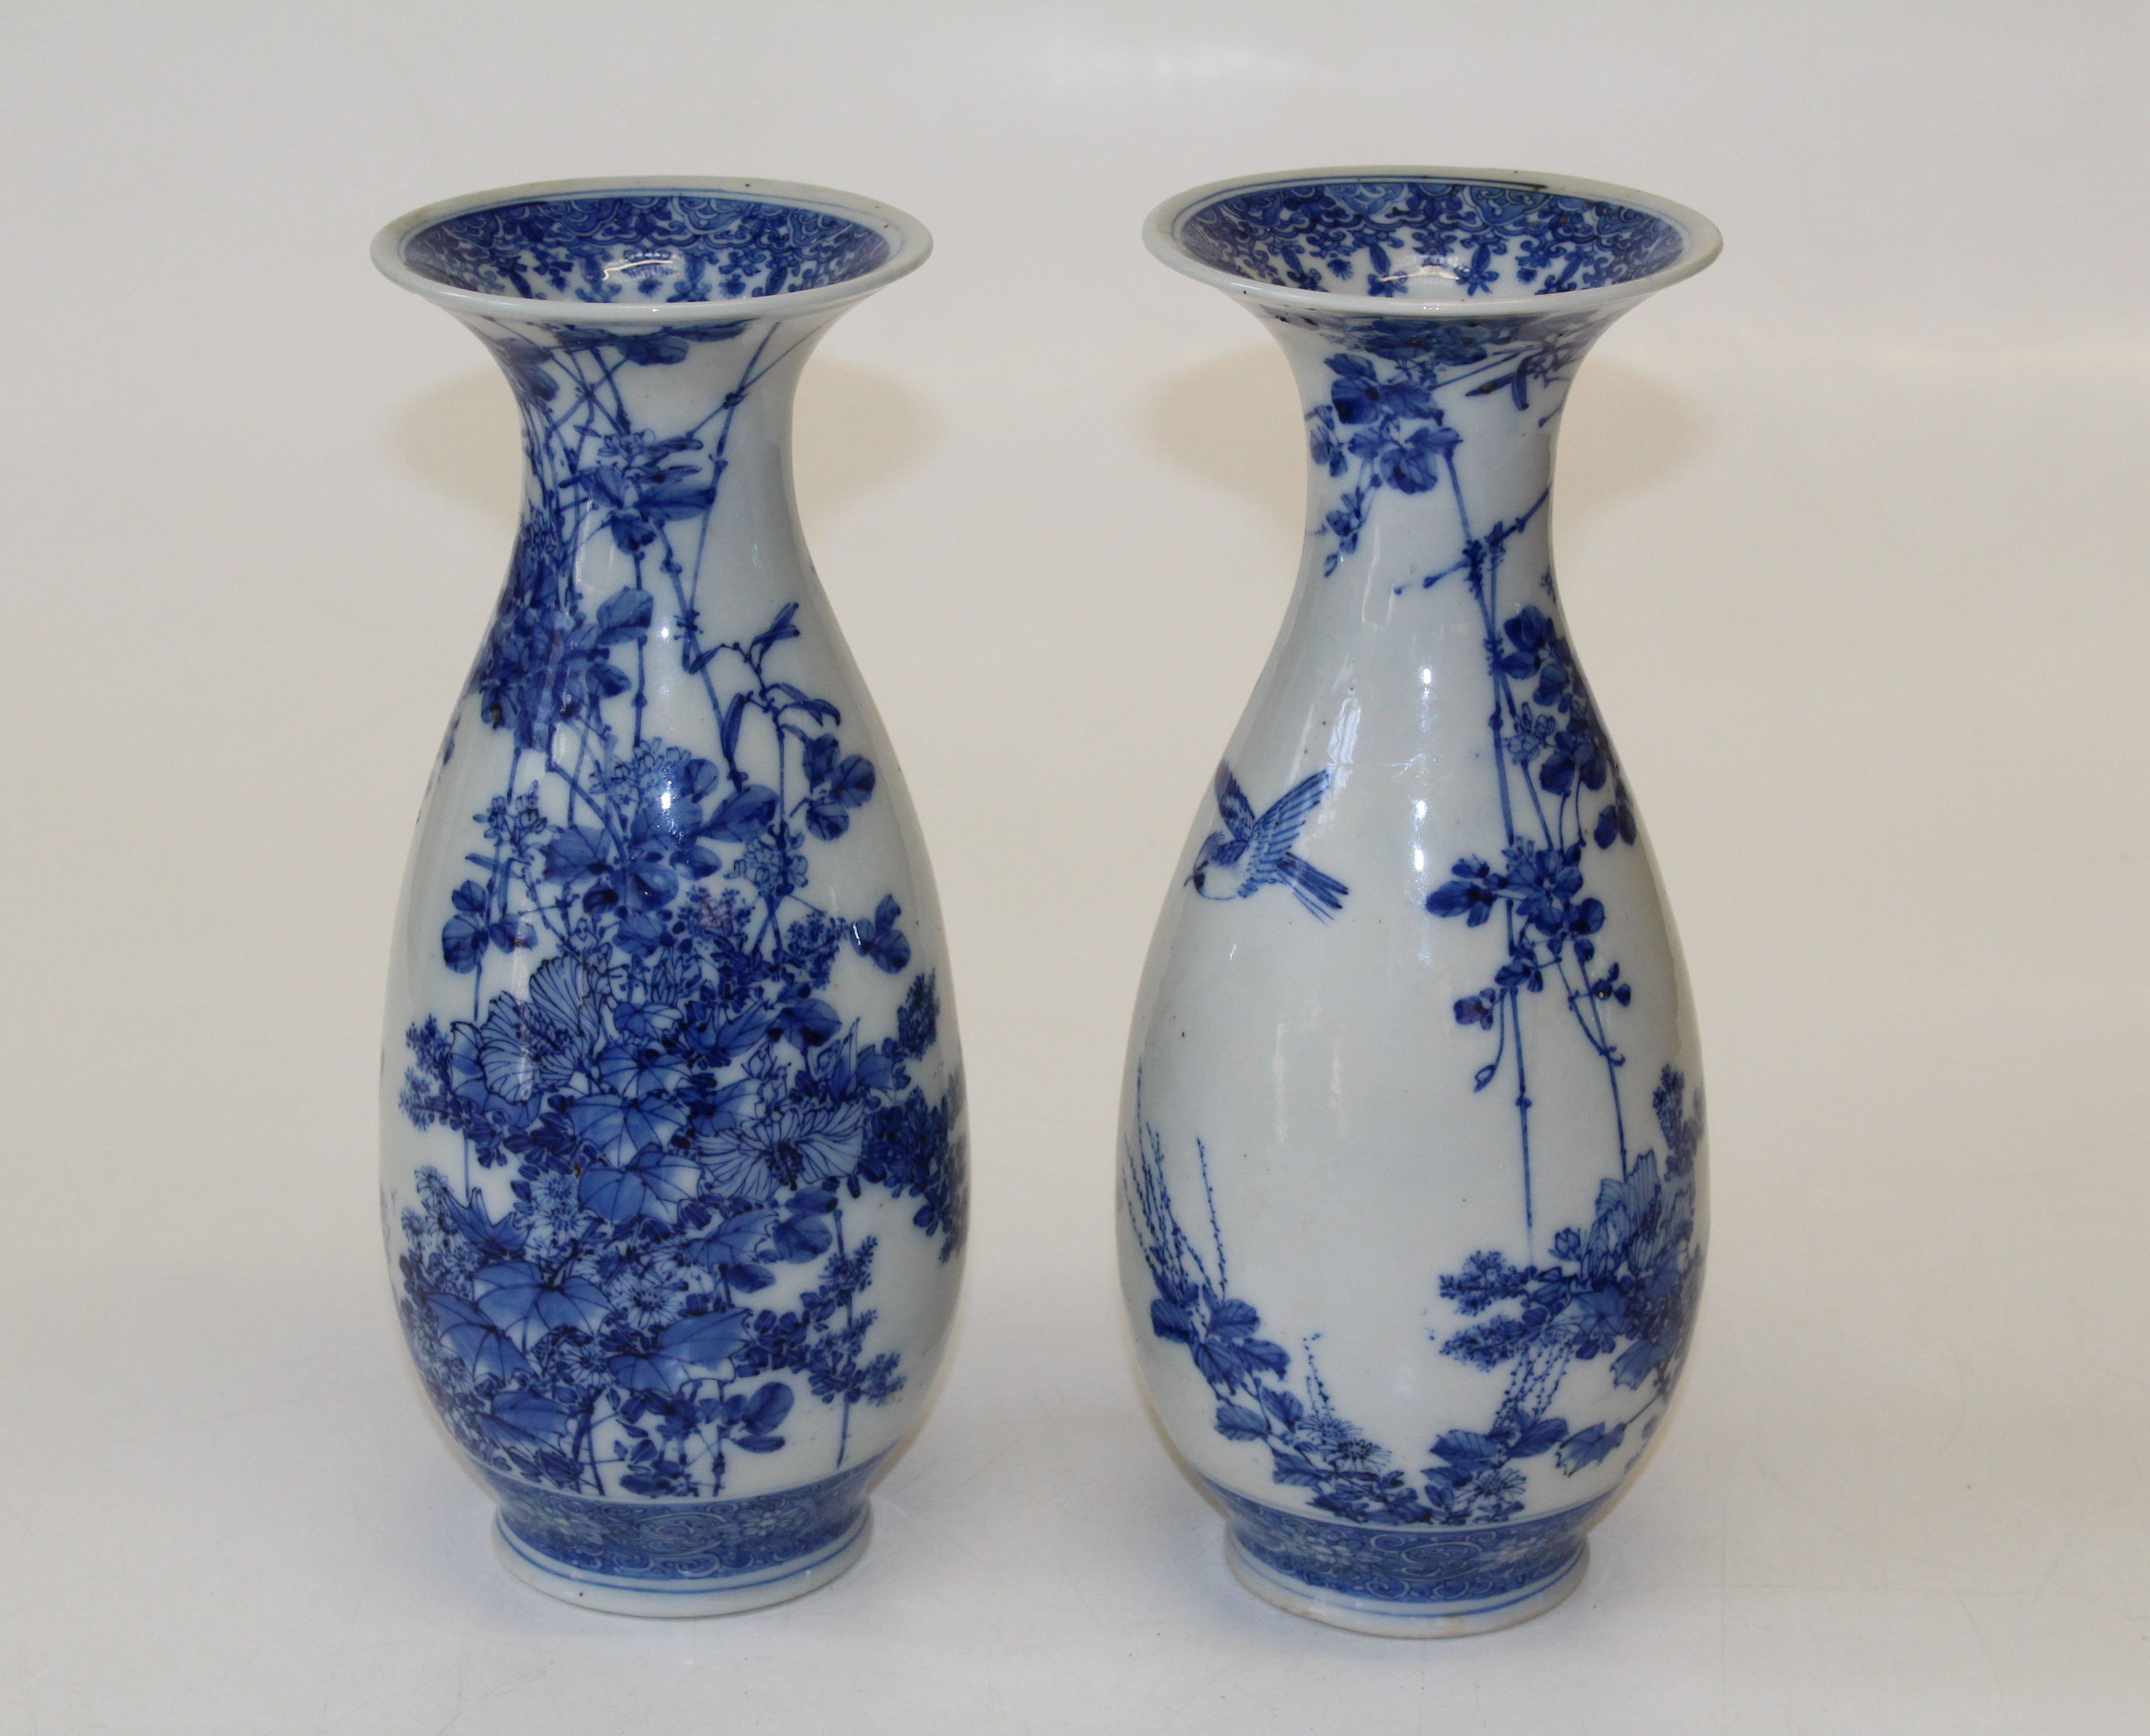 A pair of late 19th century Japanese porcelain blue and white vases of baluster form with flared